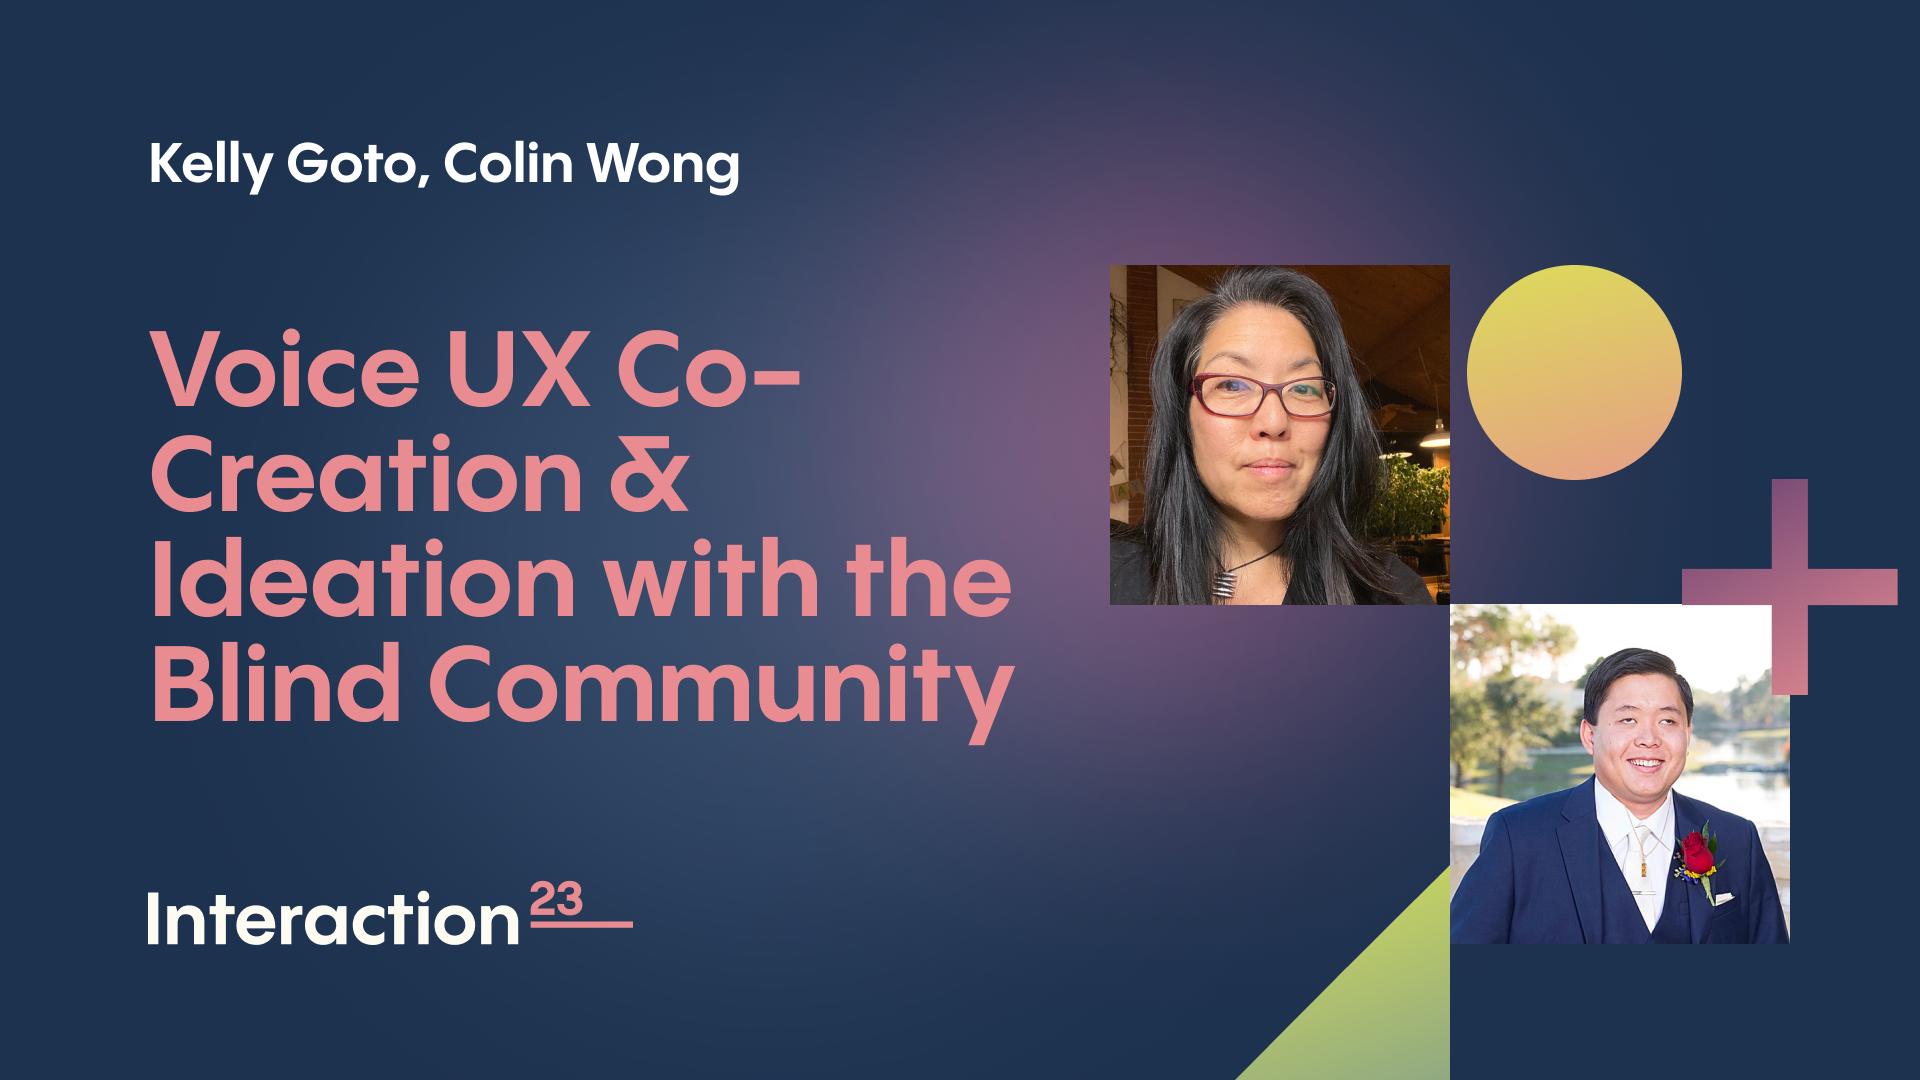 Voice UX Co-Creation & Ideation with the Blind Community